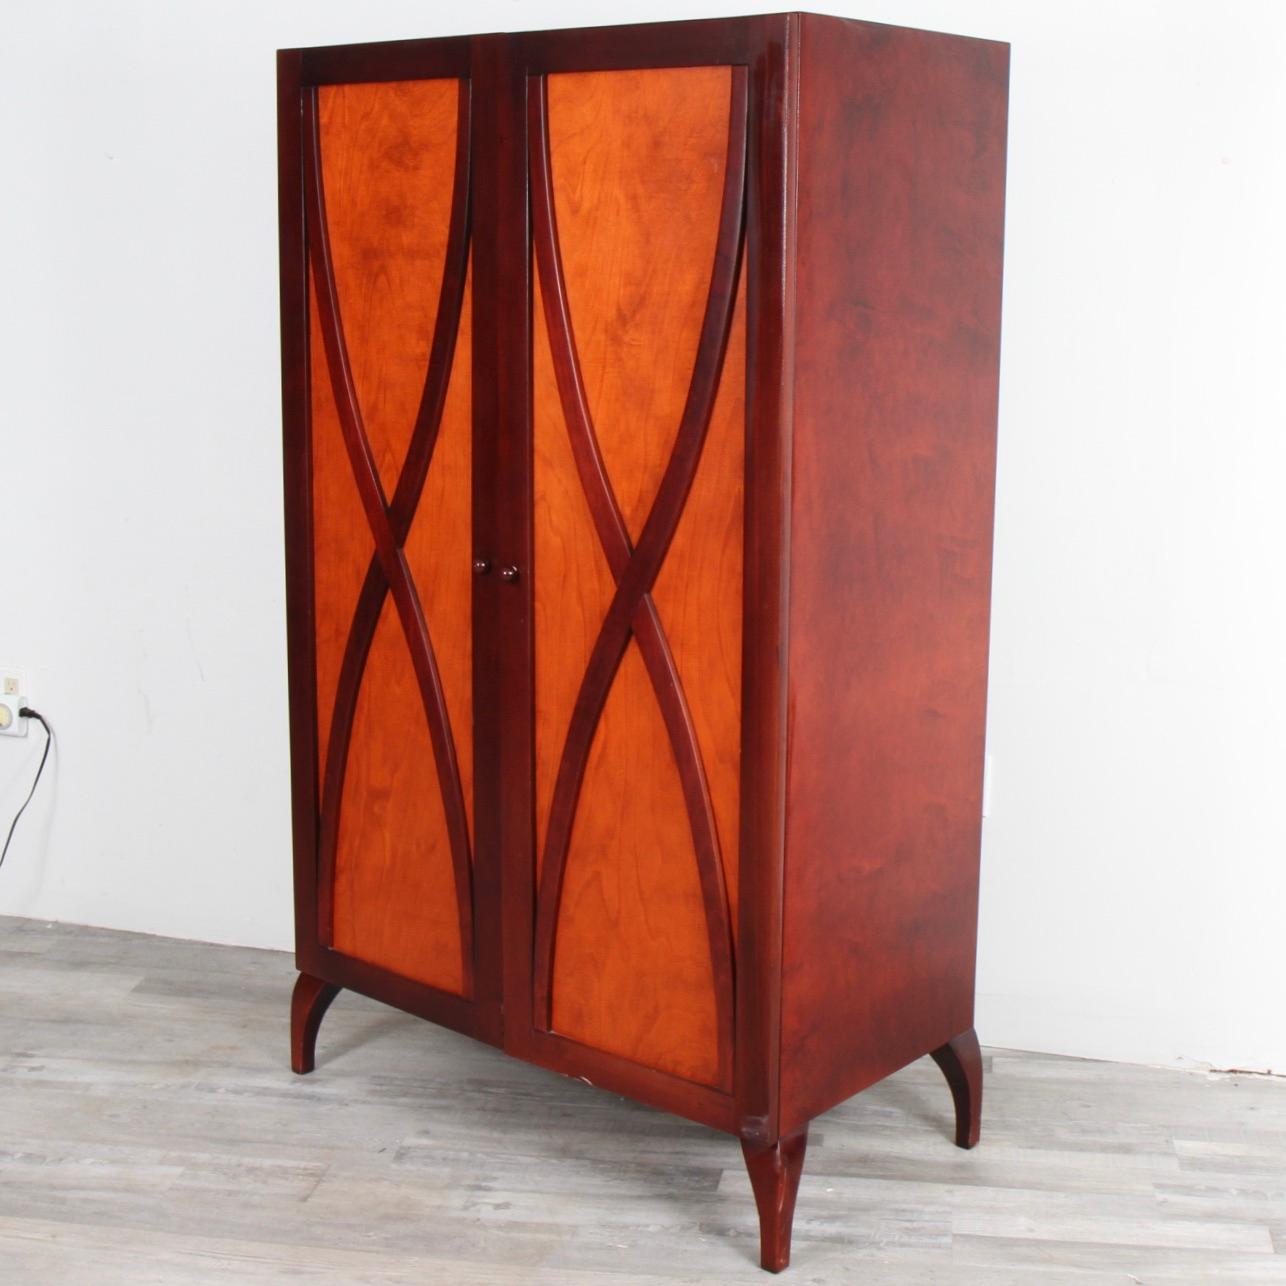 This media cabinet is just one of the many fantastic designs that husband and wife, Monique & Sergio Savarese, founders of Dialogica created before the untimely death of Sergio in 2006. The piece is made of cherry front door inserts with a mahogany